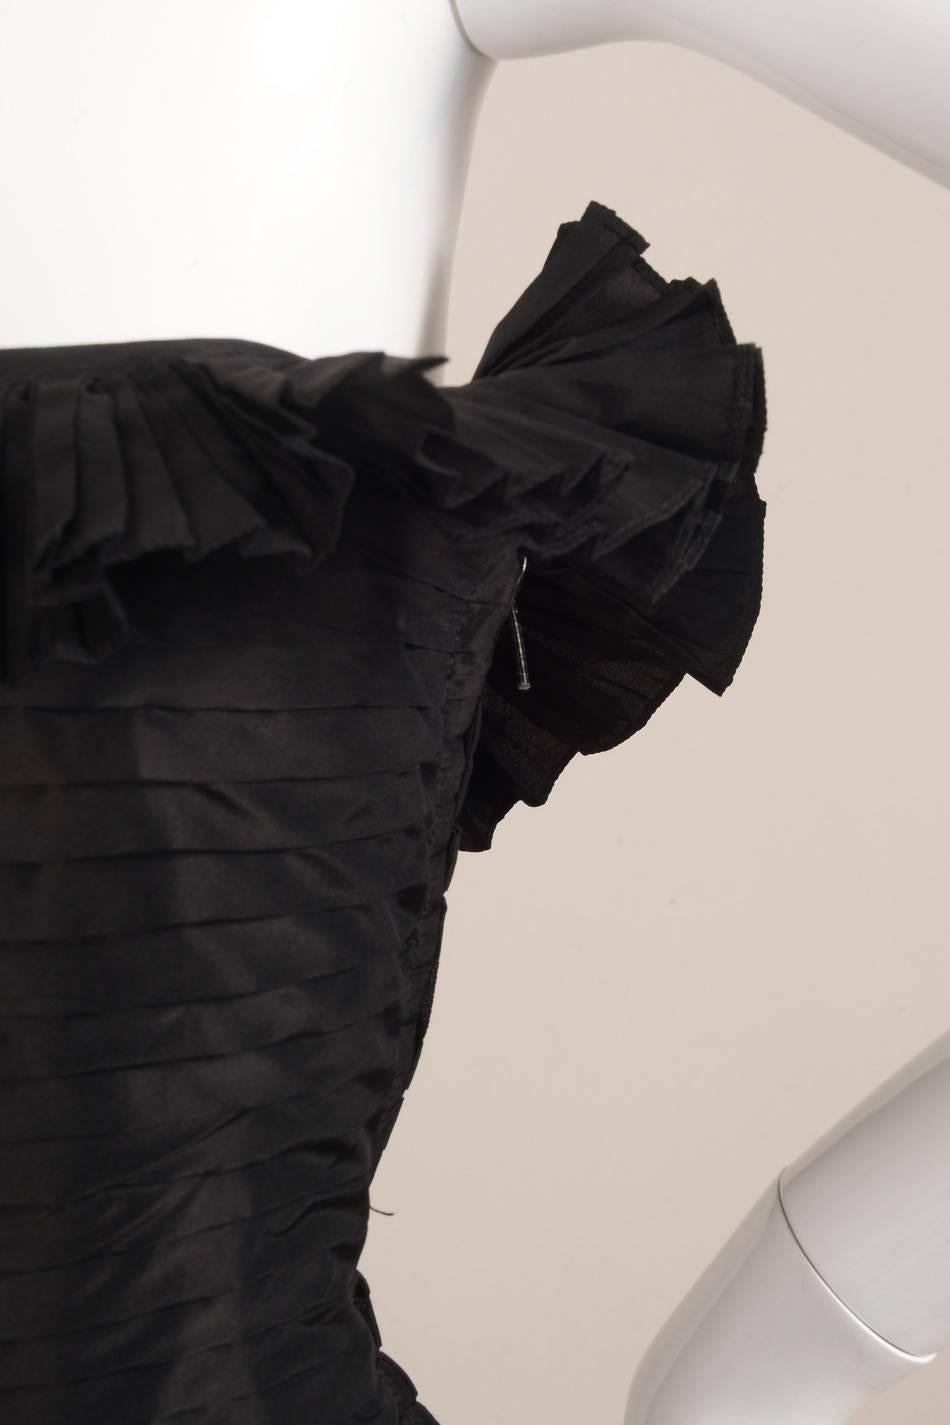 Oscar de la Renta Black Tiered Pleated Tulle Trim Strapless Mermaid Gown In Good Condition For Sale In Chicago, IL